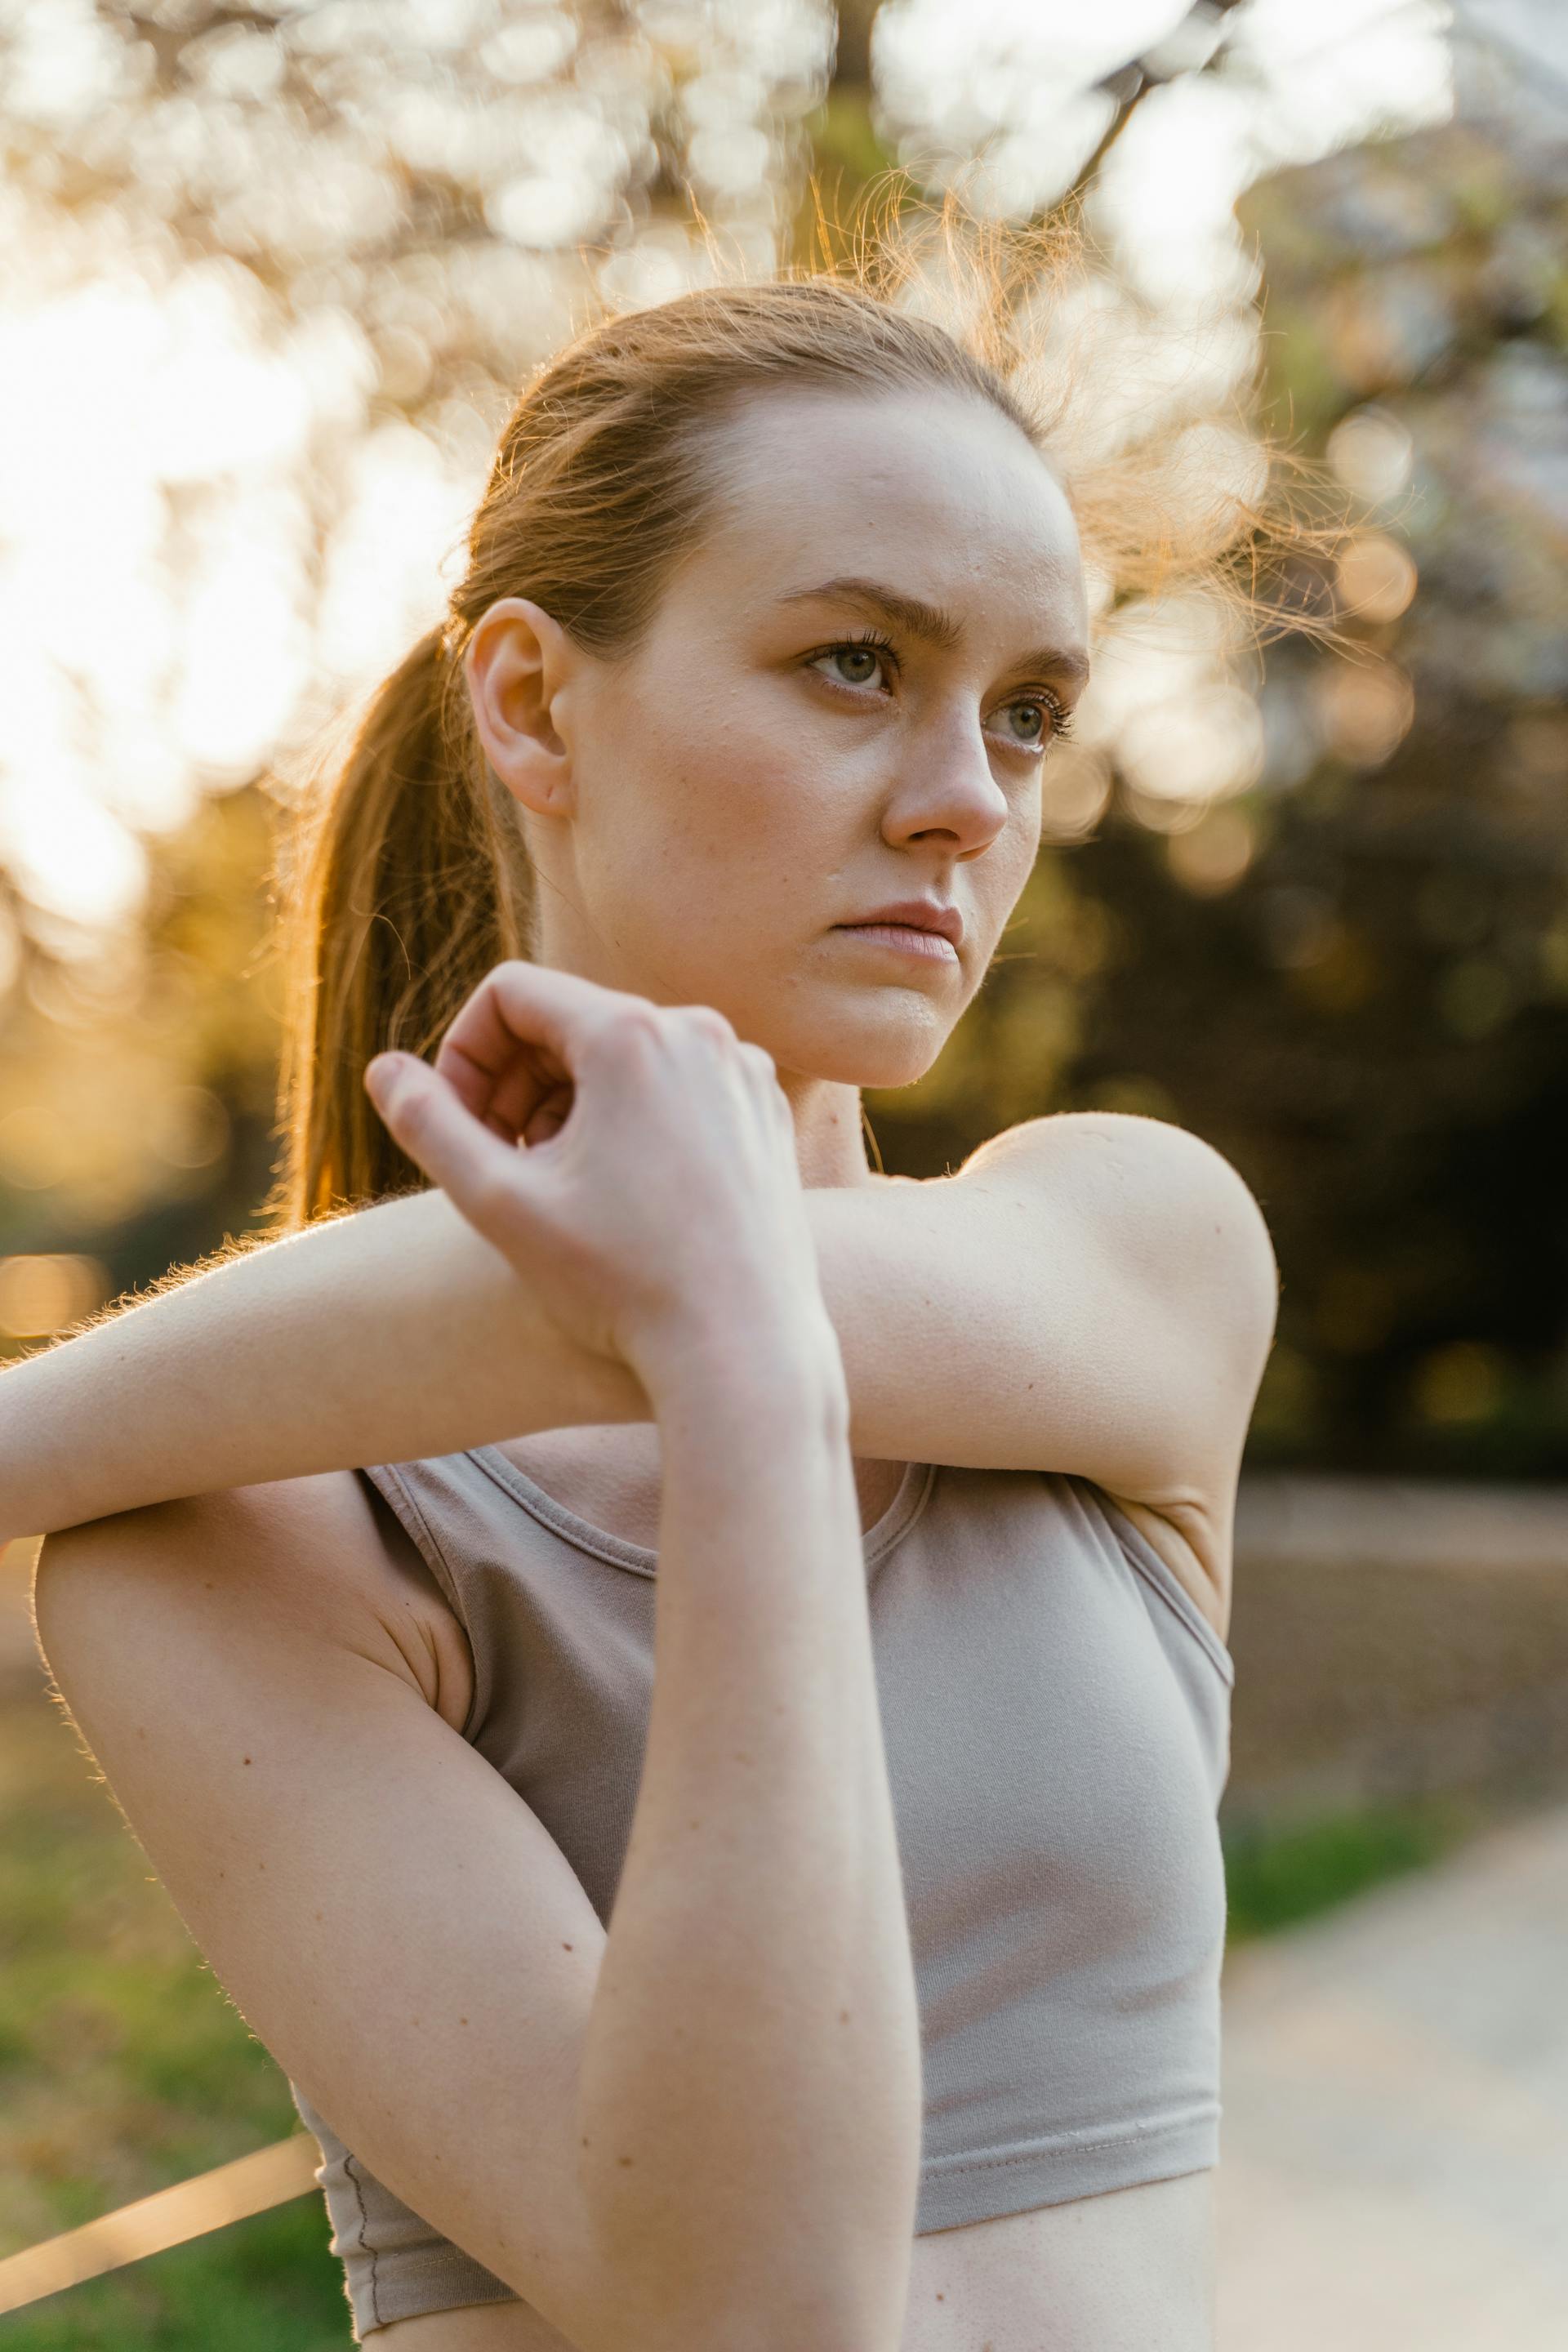 A woman with a serious facial expression stretching outdoors | Source: Pexels